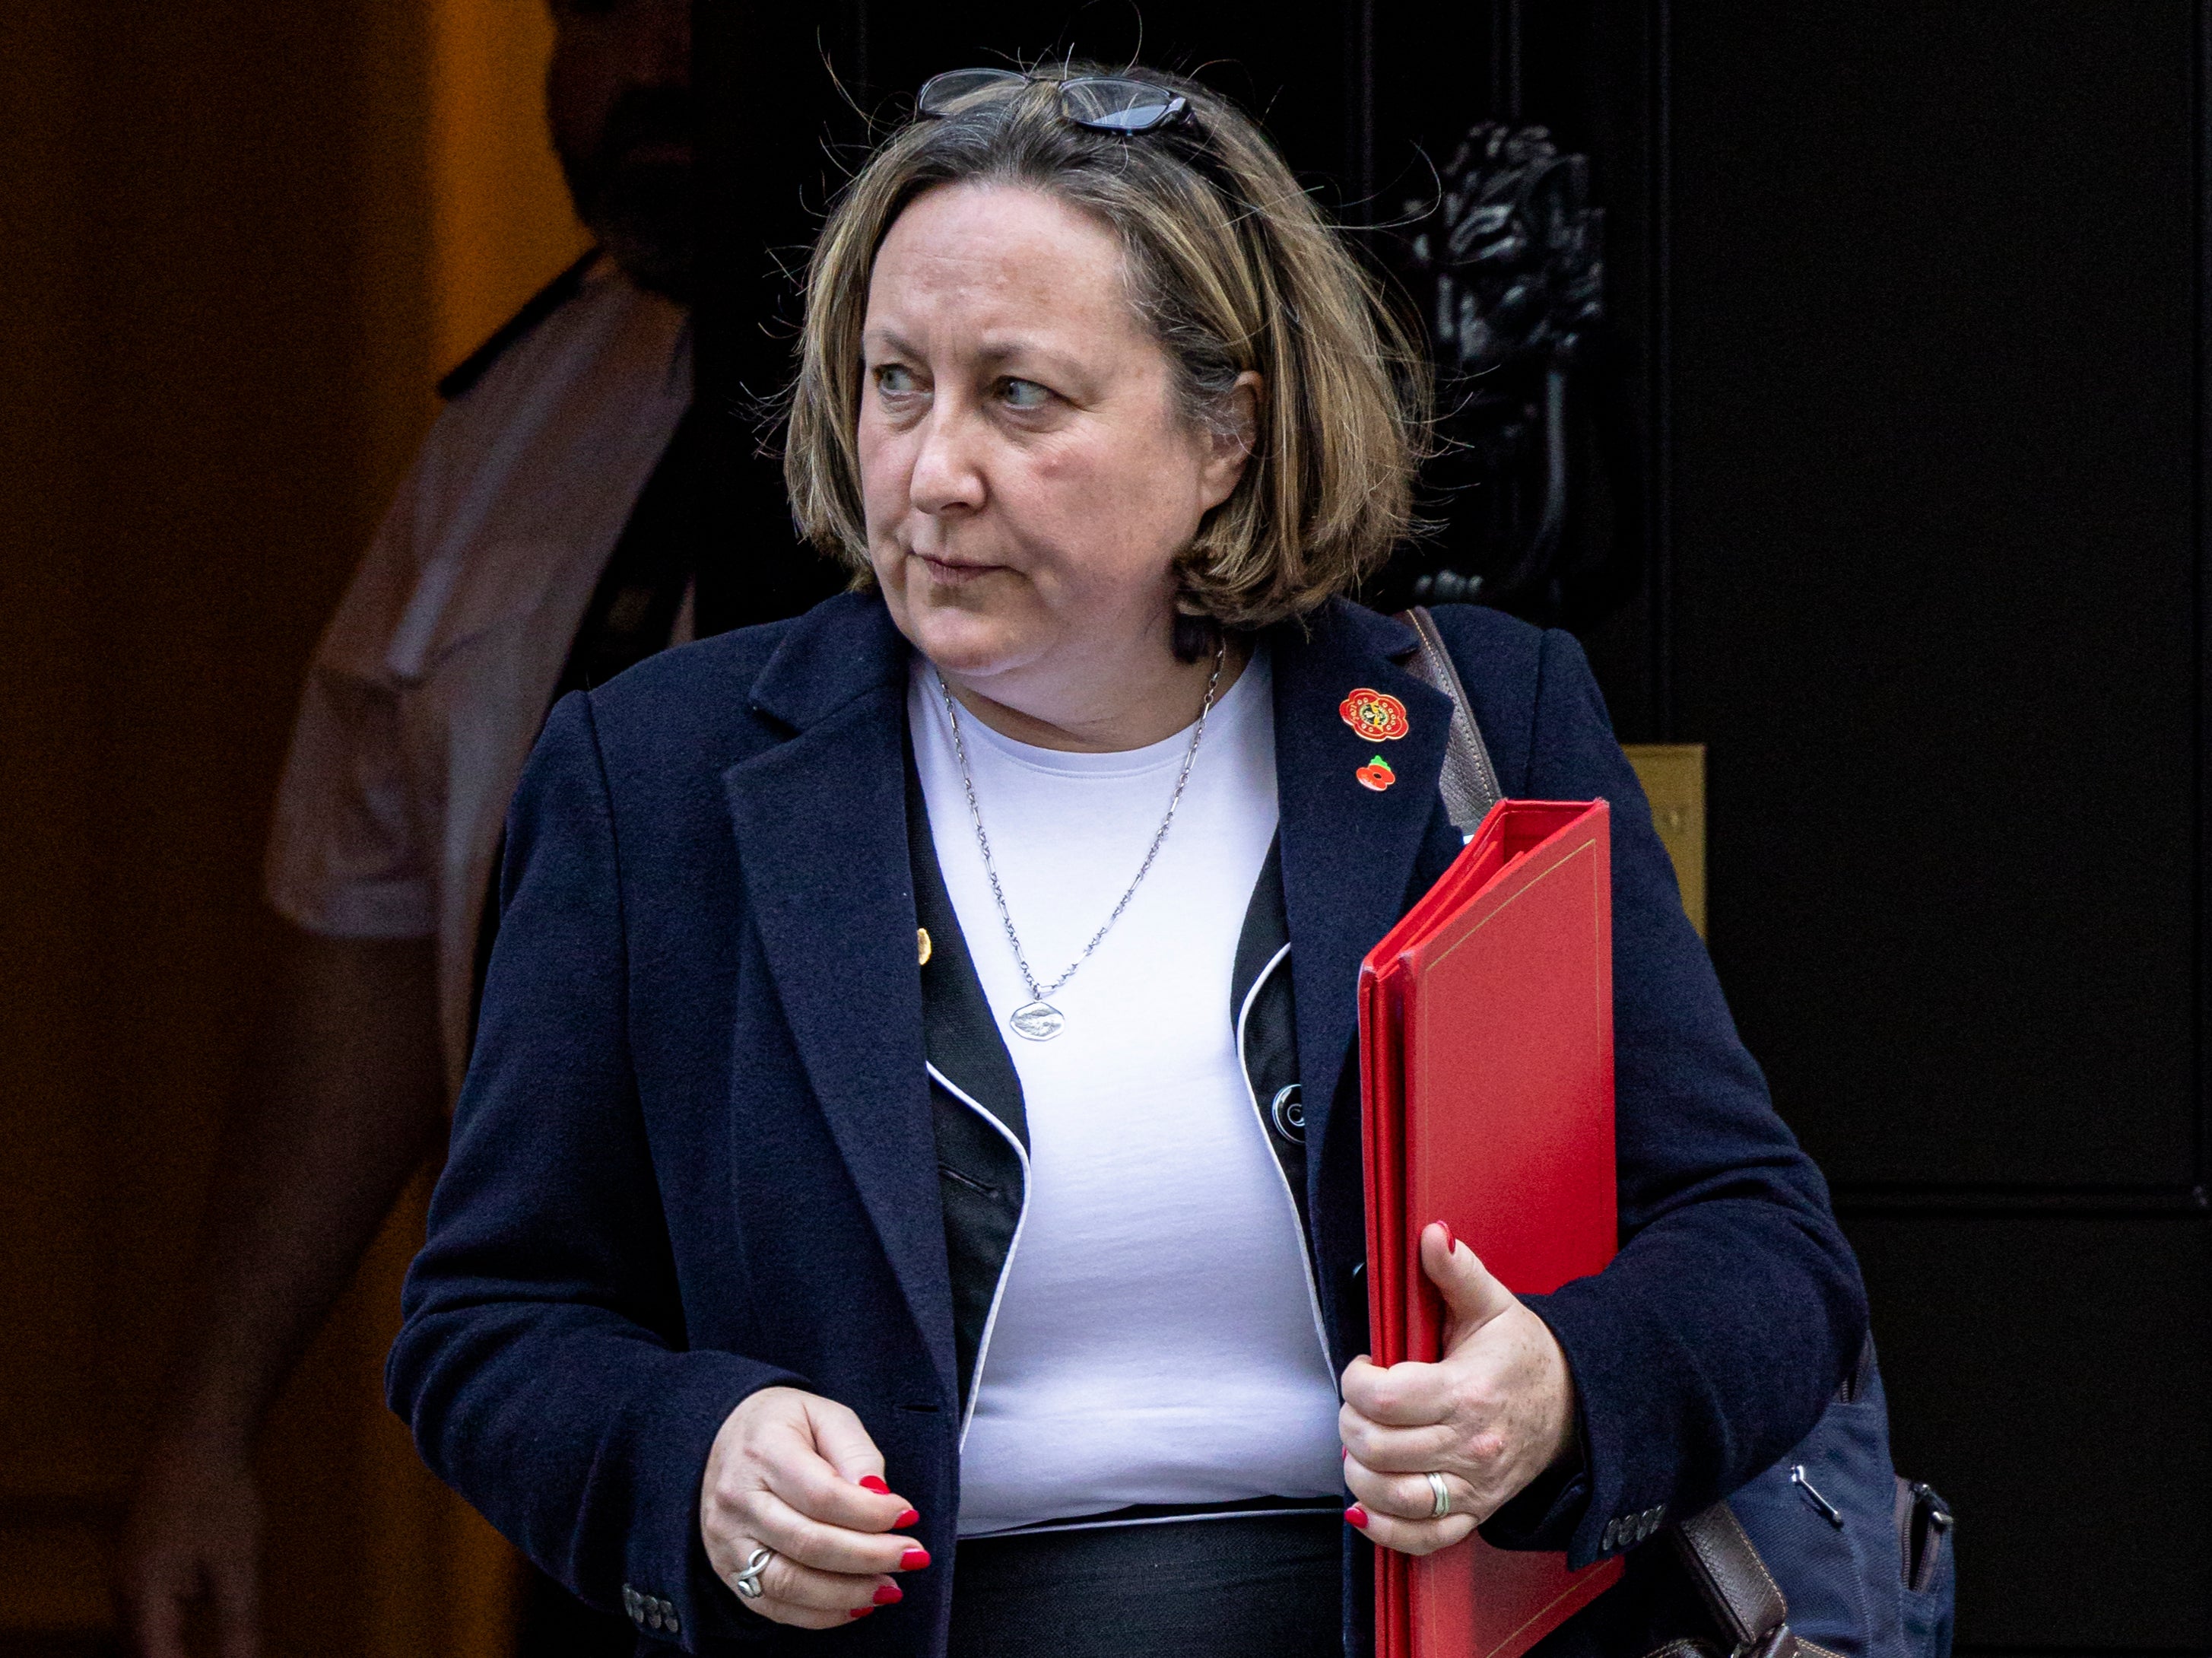 Anne-Marie Trevelyan, the trade secretary, was given a warning that London transport network needs to be properly funded if it’s to support the global trade agenda.